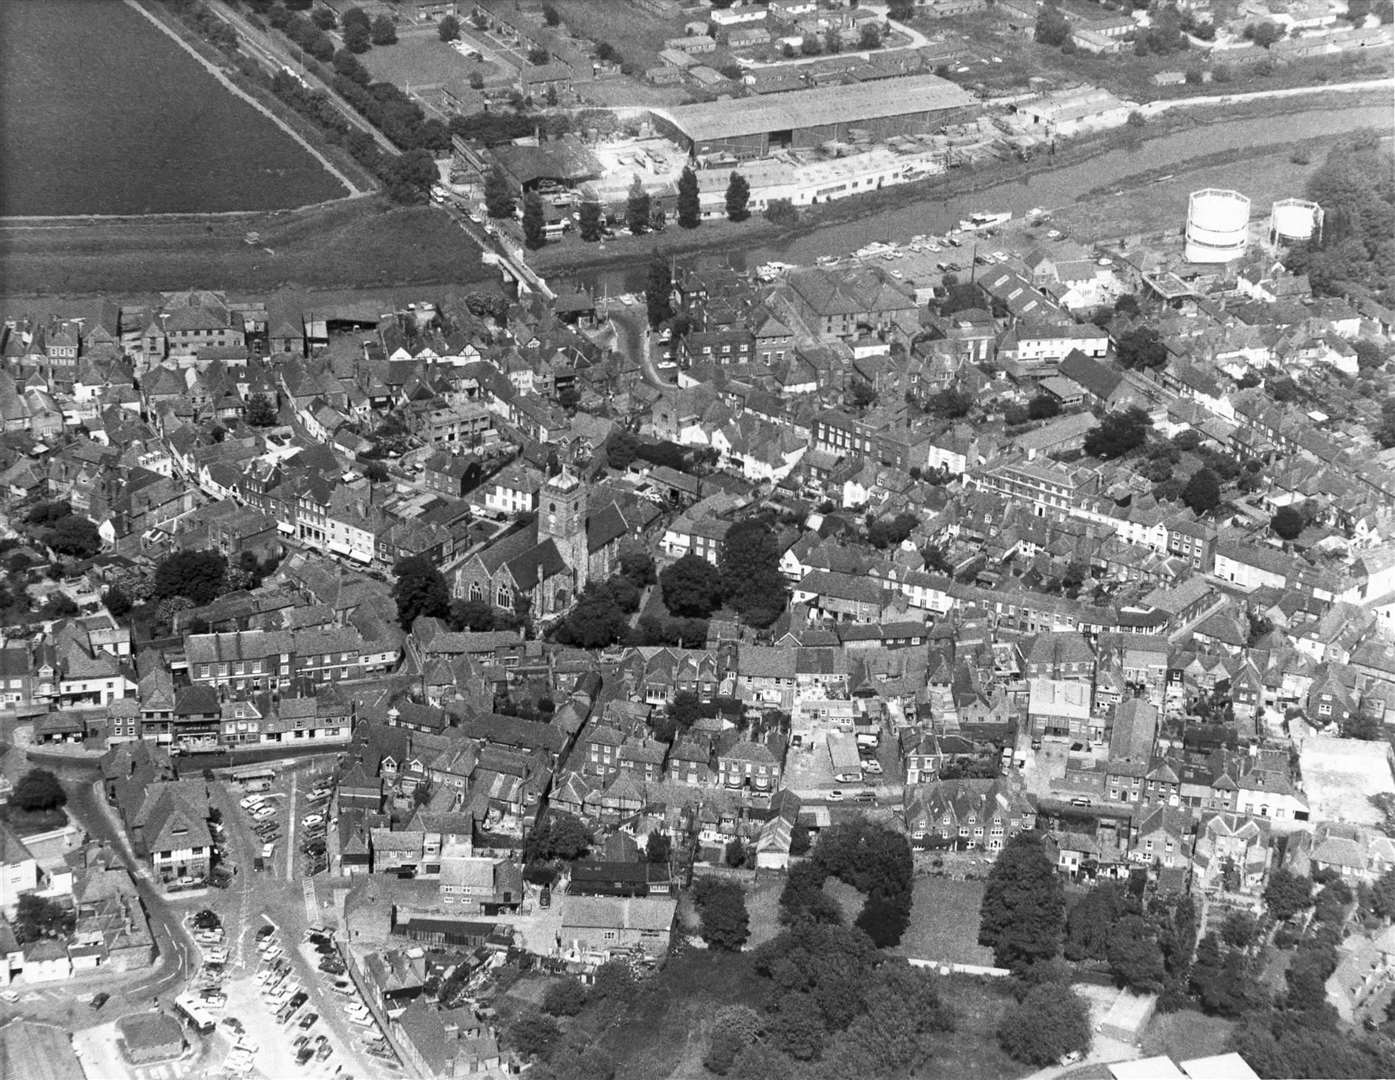 The heart of Sandwich pictured from the air in 1971